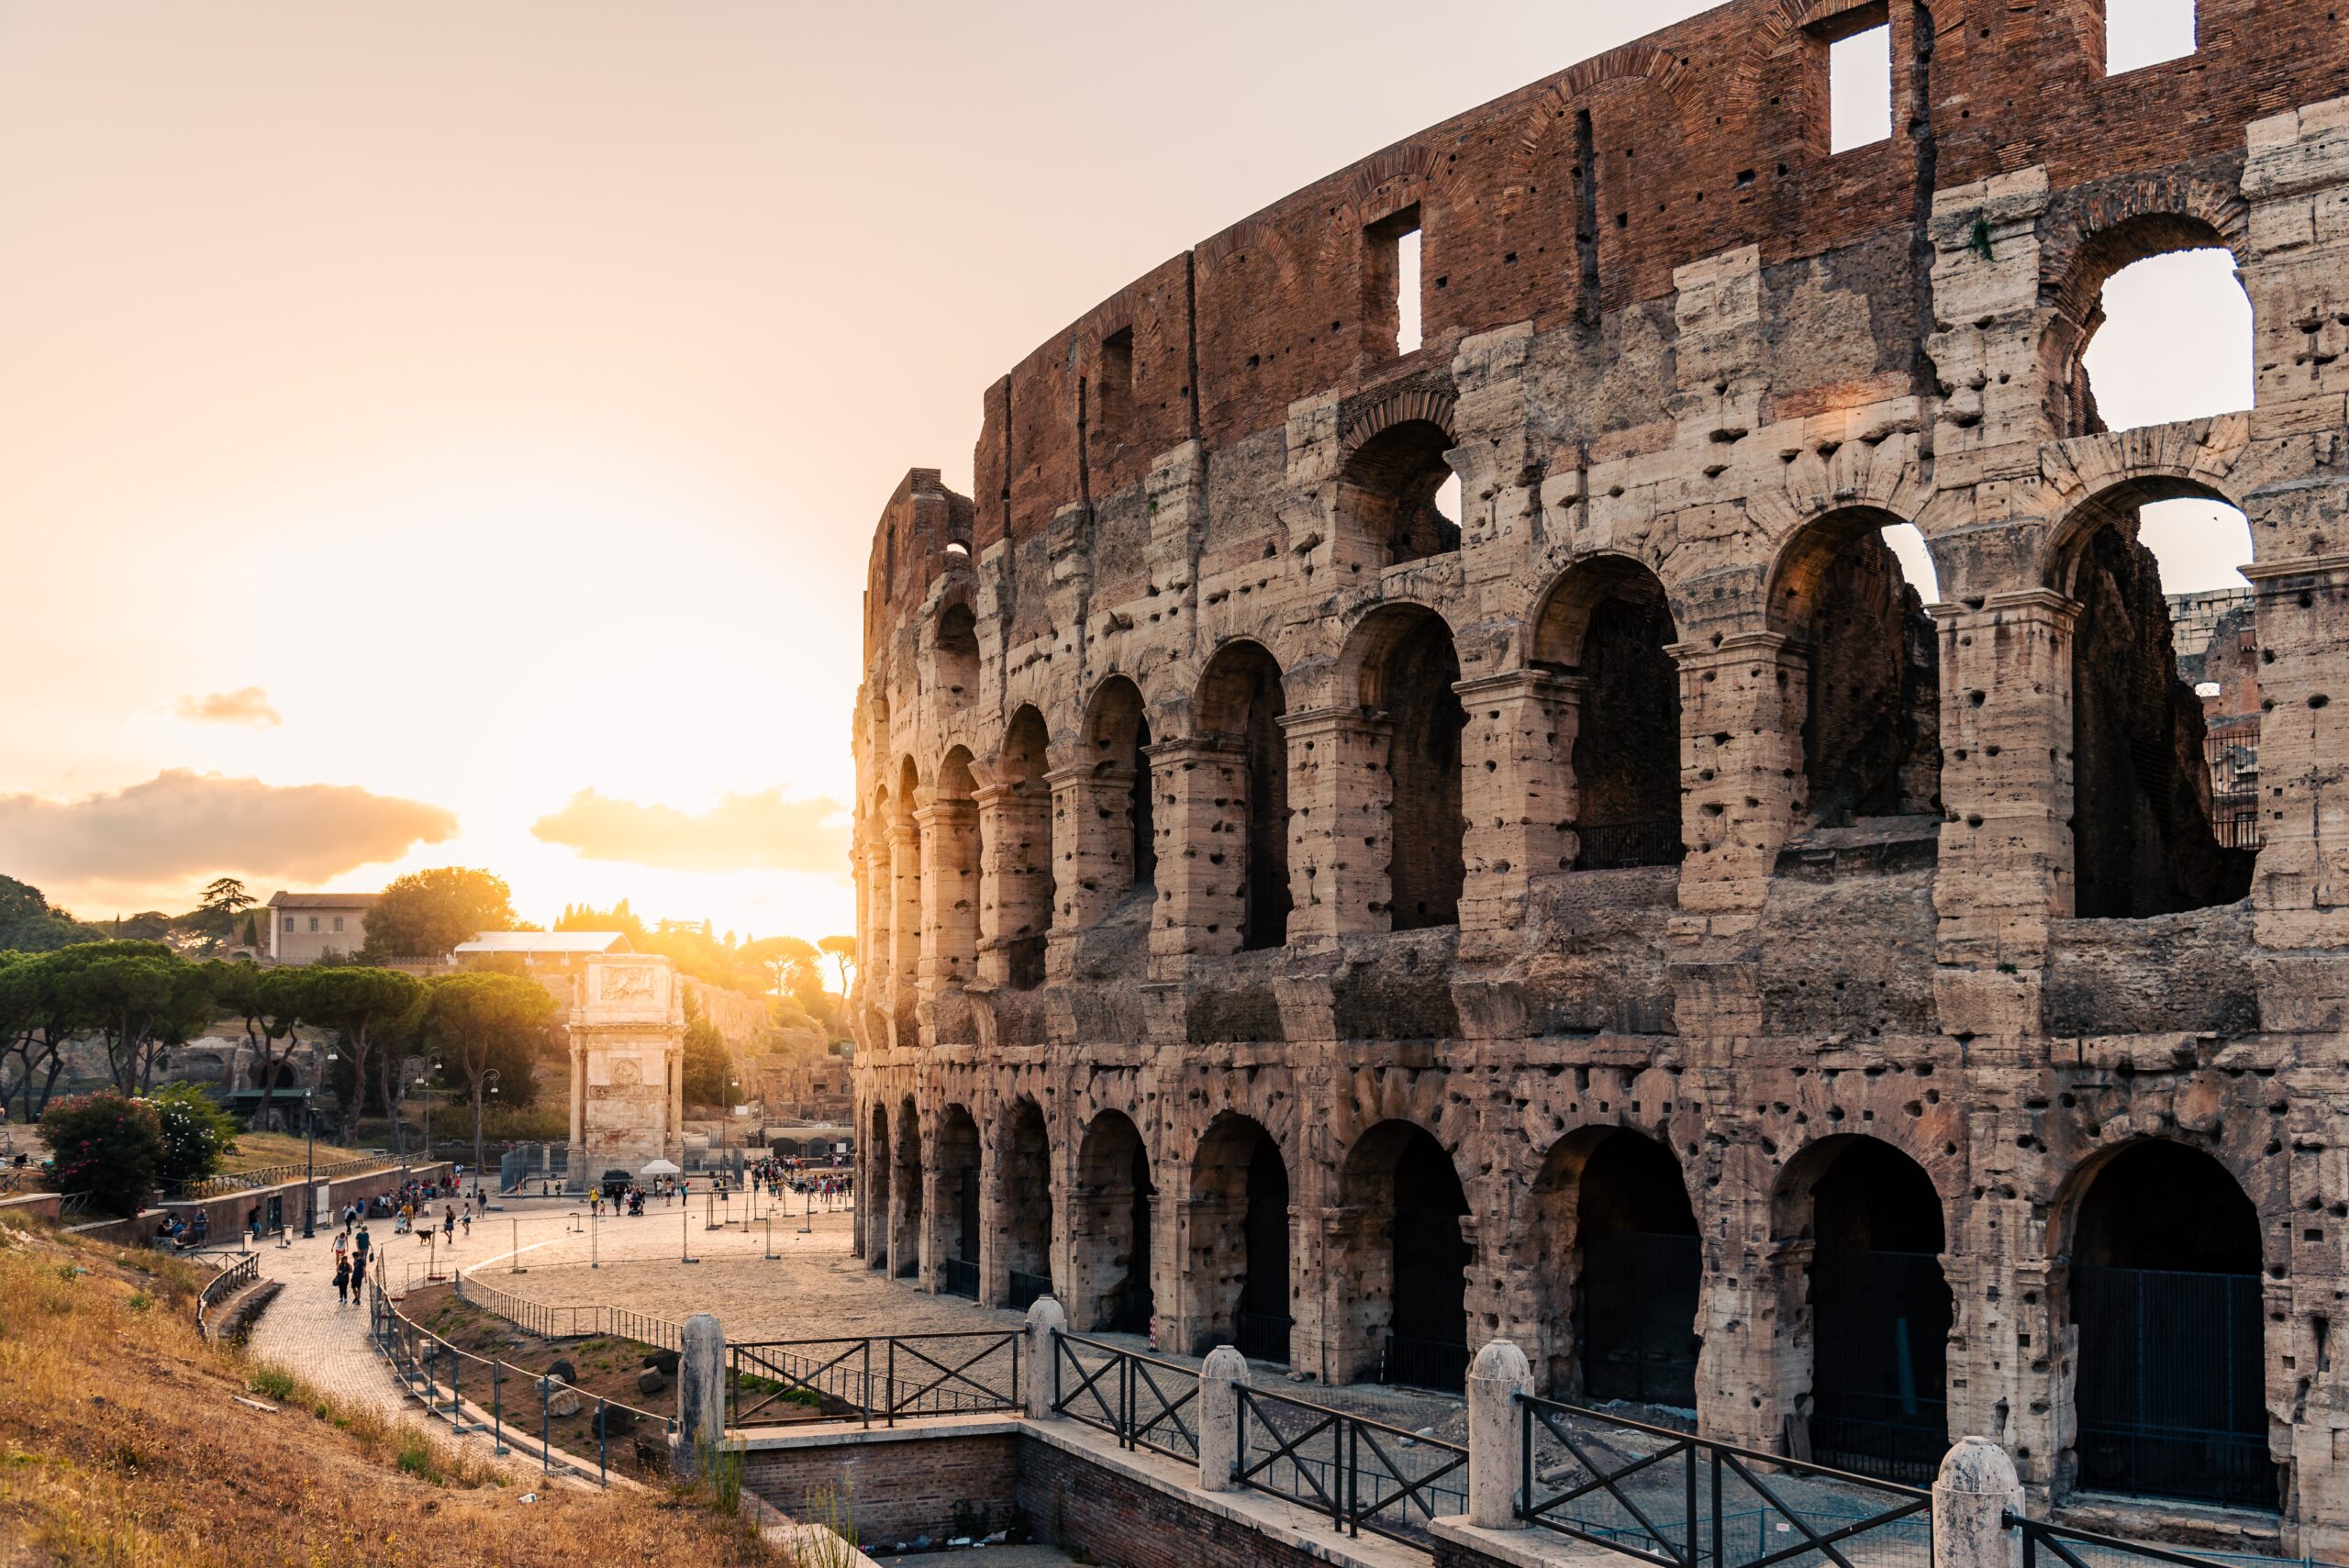 Outdoor view of The Colosseum or Coliseum with sun flare on background, also known as the Flavian Amphitheatre. It is an oval amphitheatre in the centre of Rome.